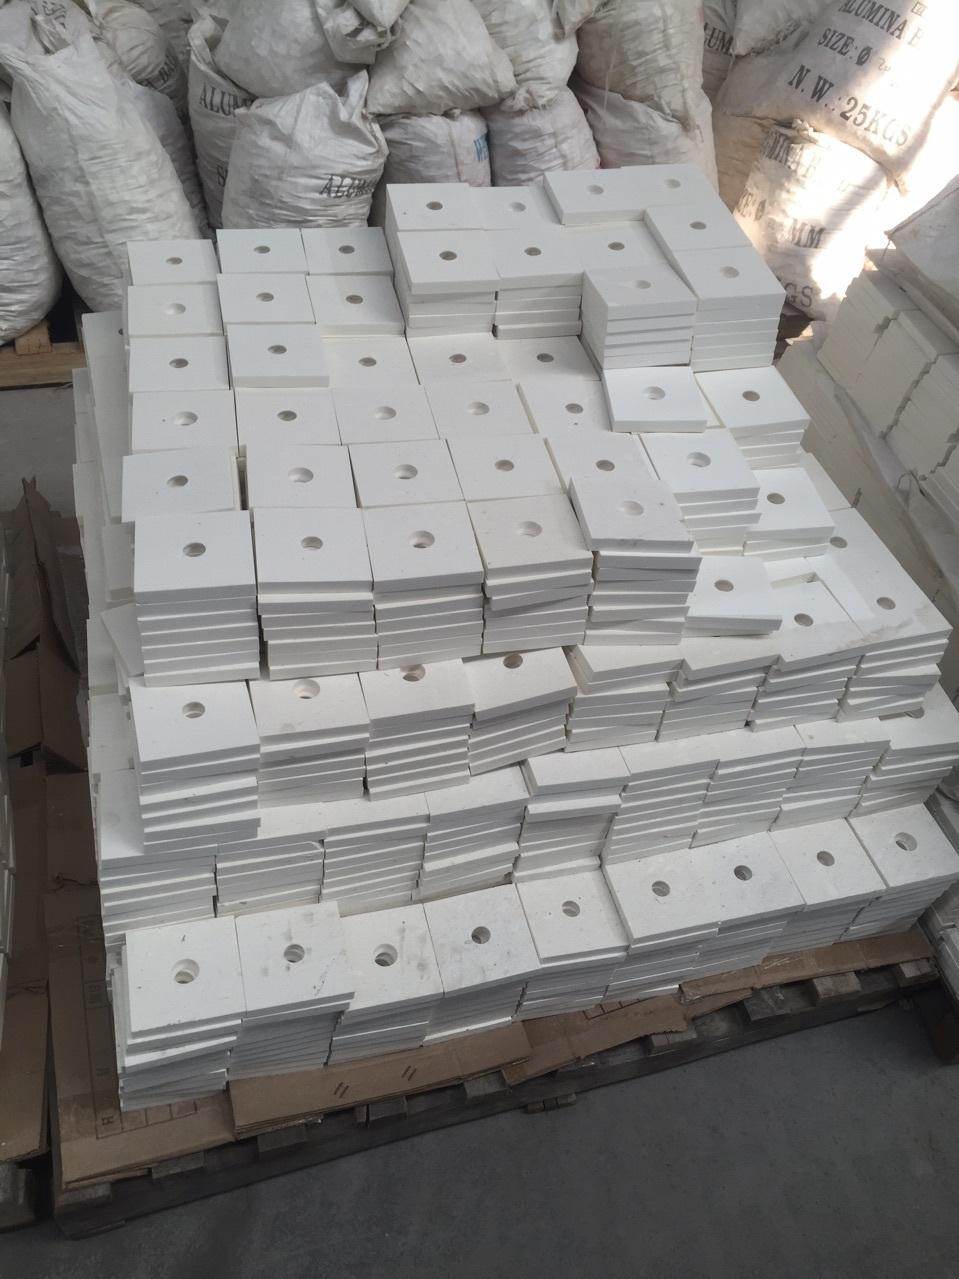 92% Alumina tiles and pipe Linings - ceramic lined wear-resistant pipe